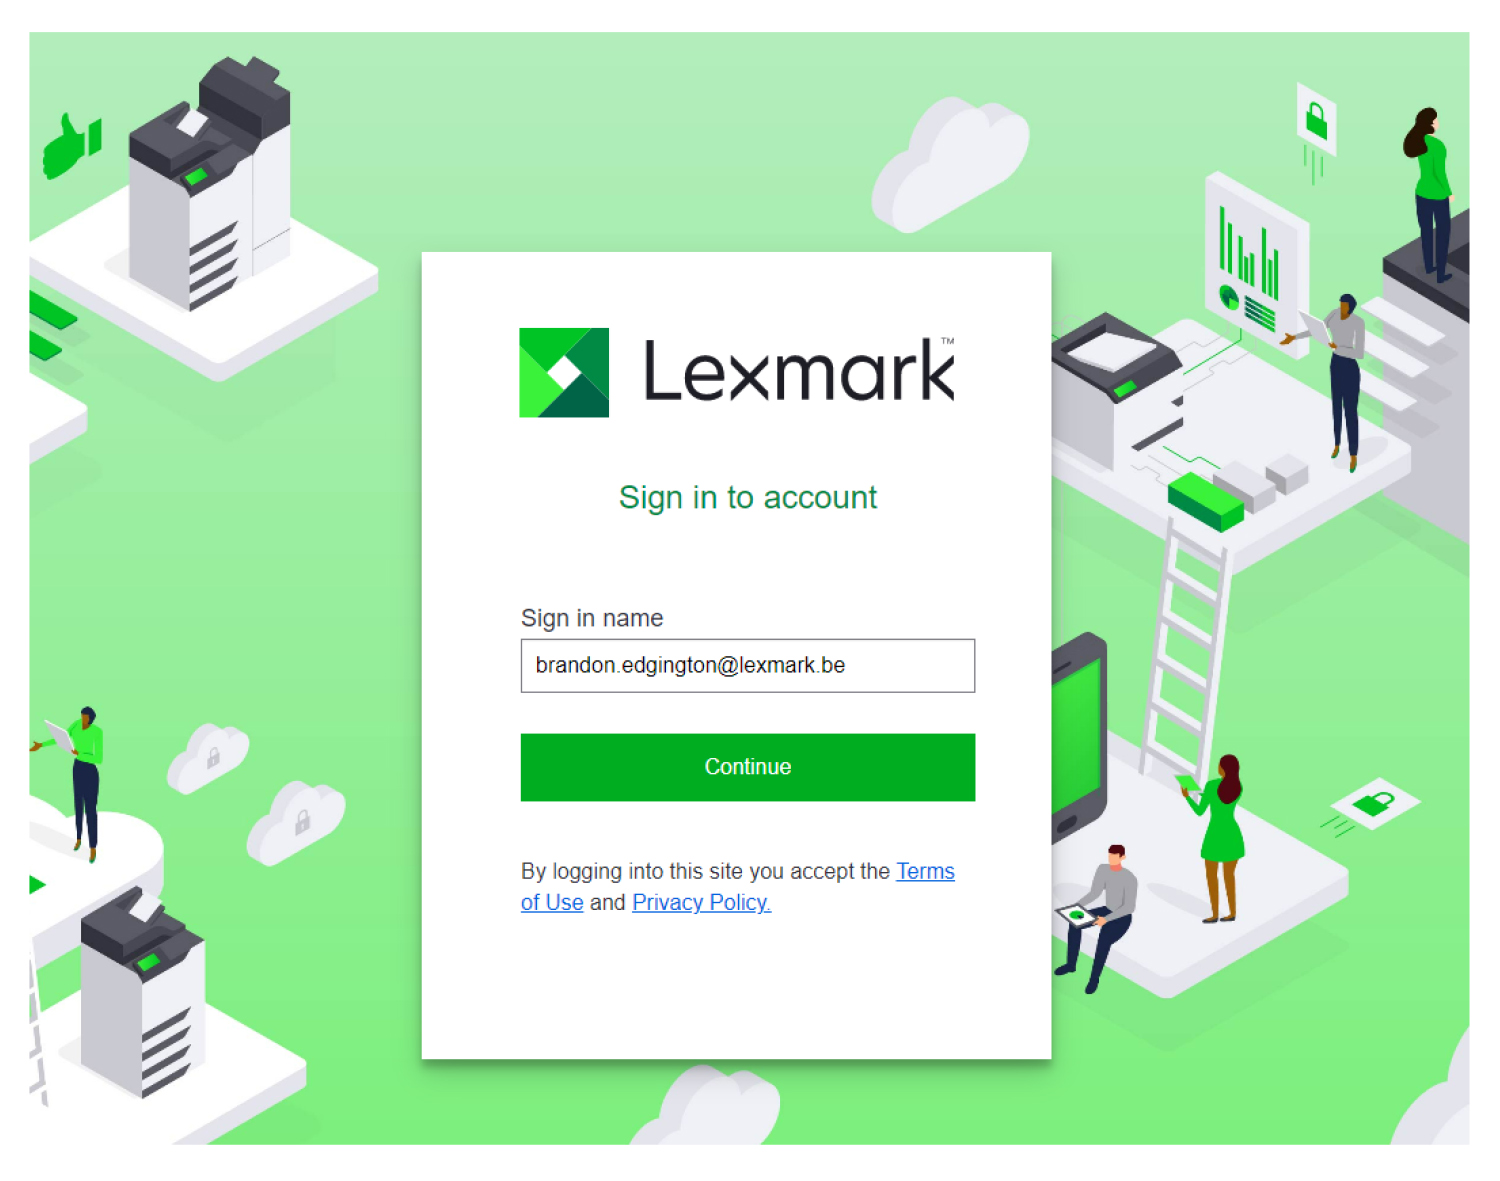 A screenshot of the Lexmark Cloud Services login page from the Azure perspective.